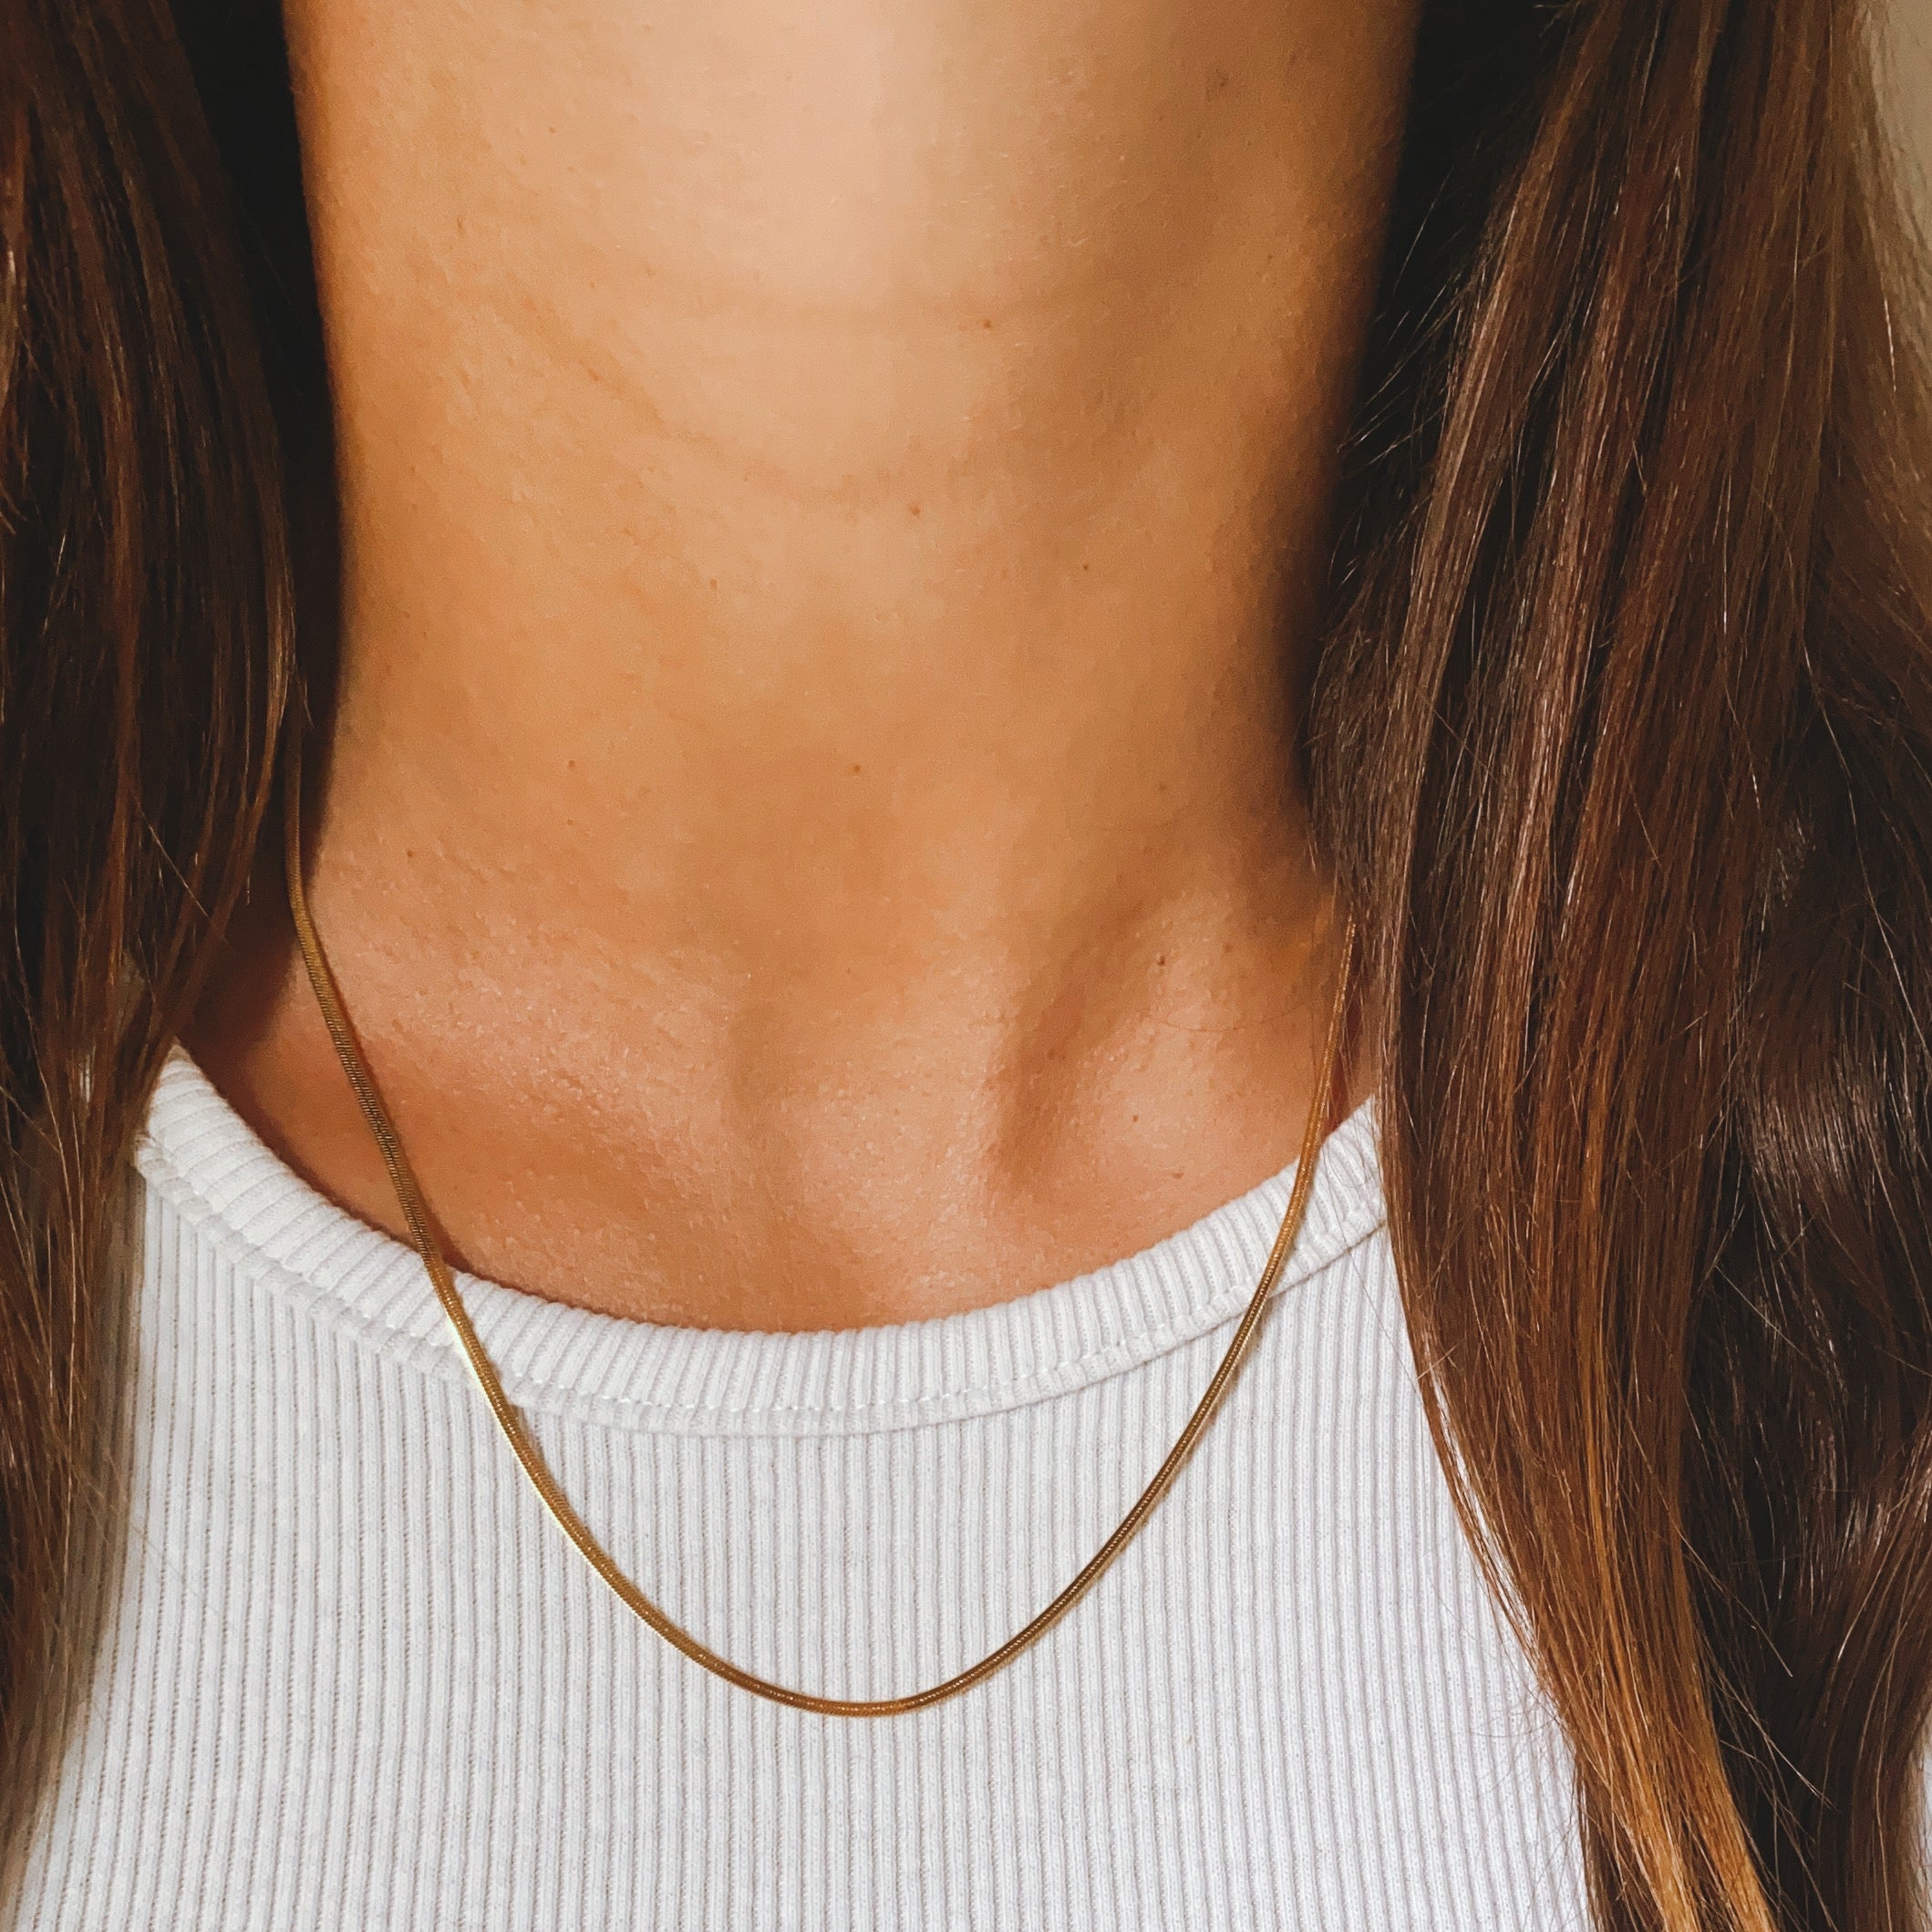 HERRINGBONE CHAIN 2mm Stainless Steel Halskette | Necklace Gold